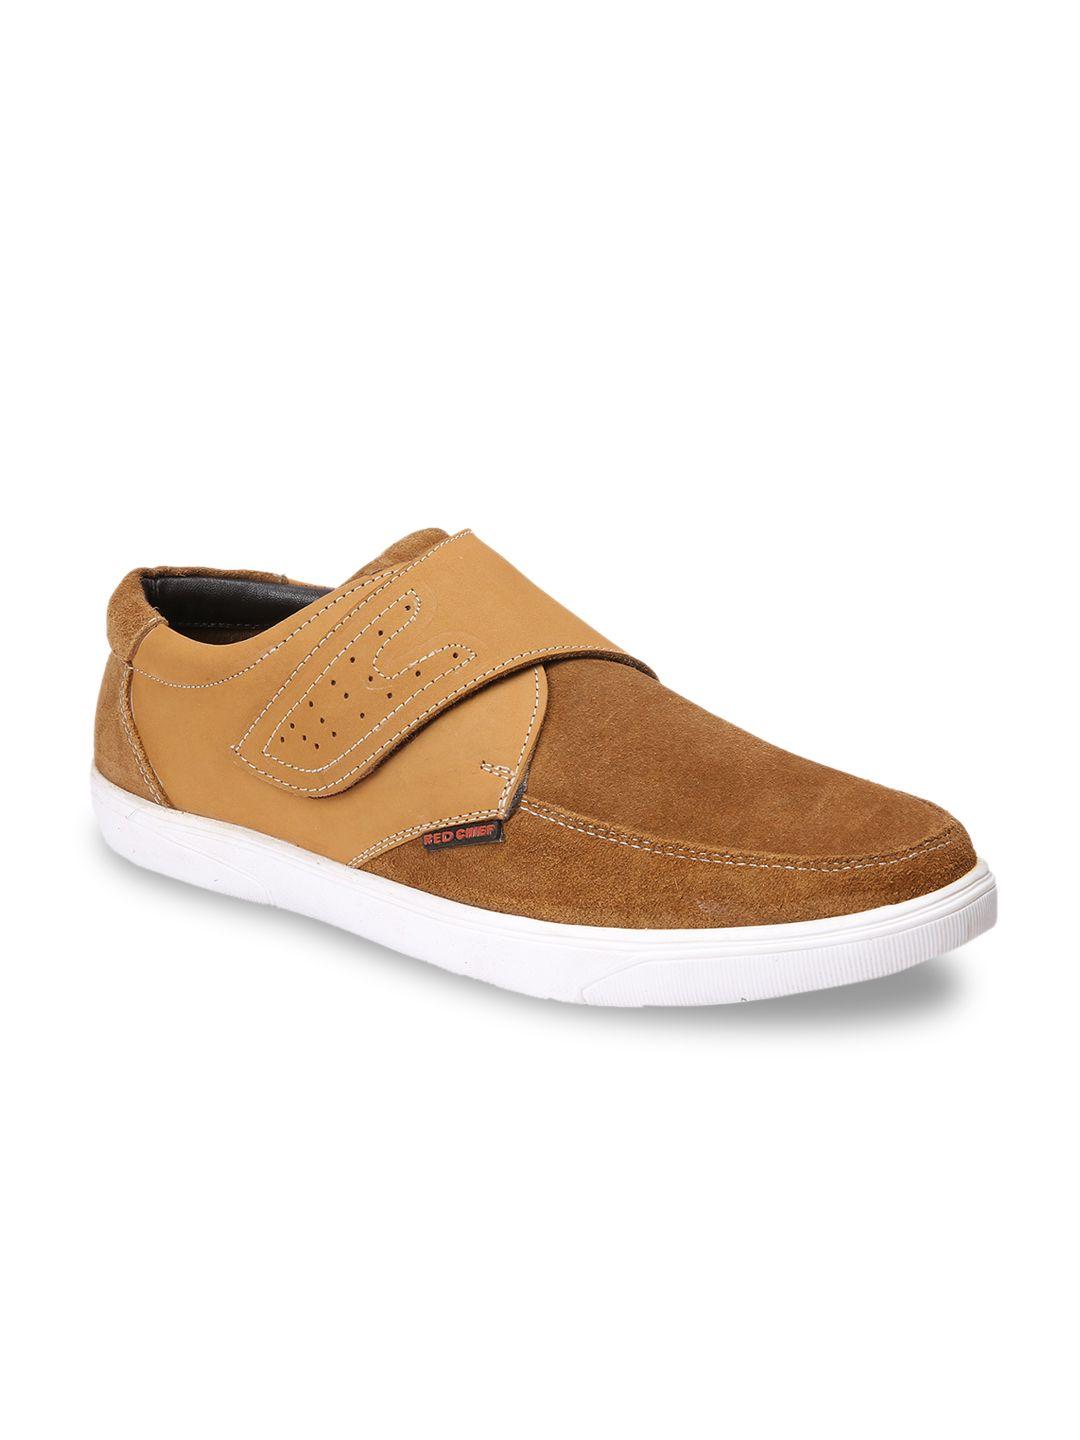 red chief men rust brown slip-on leather sneakers